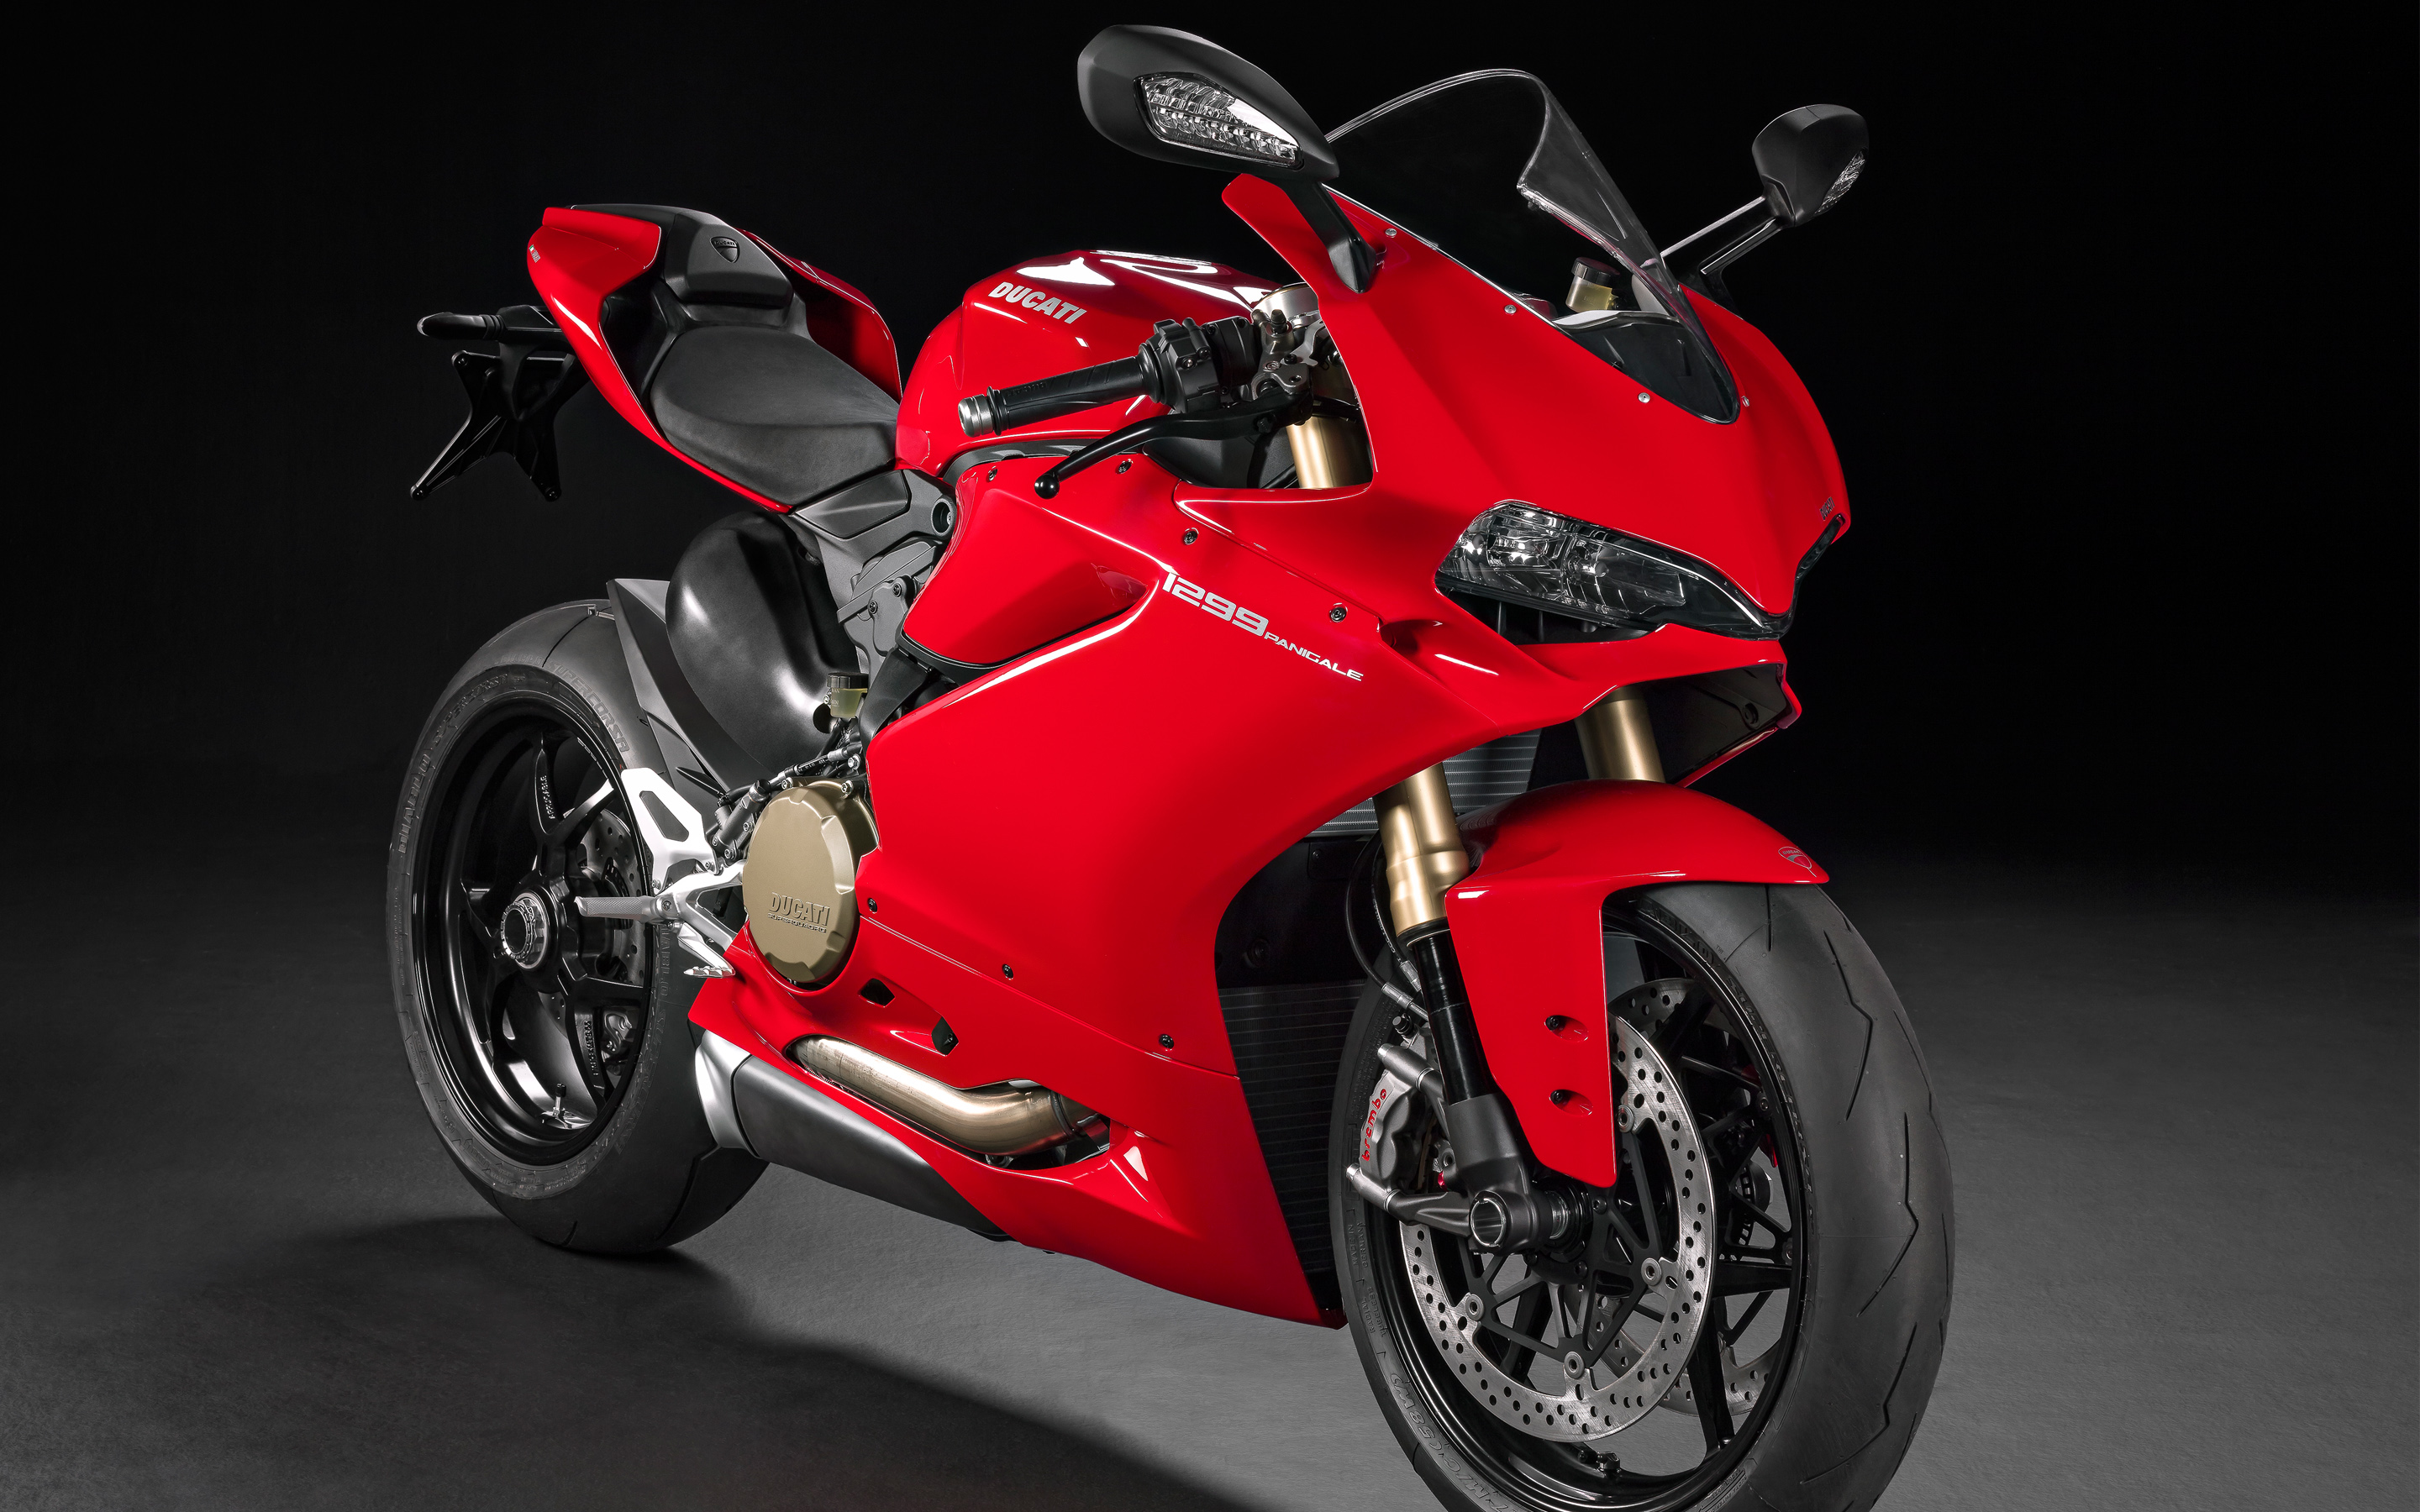 Ducati sports red motorcycle on a dark background